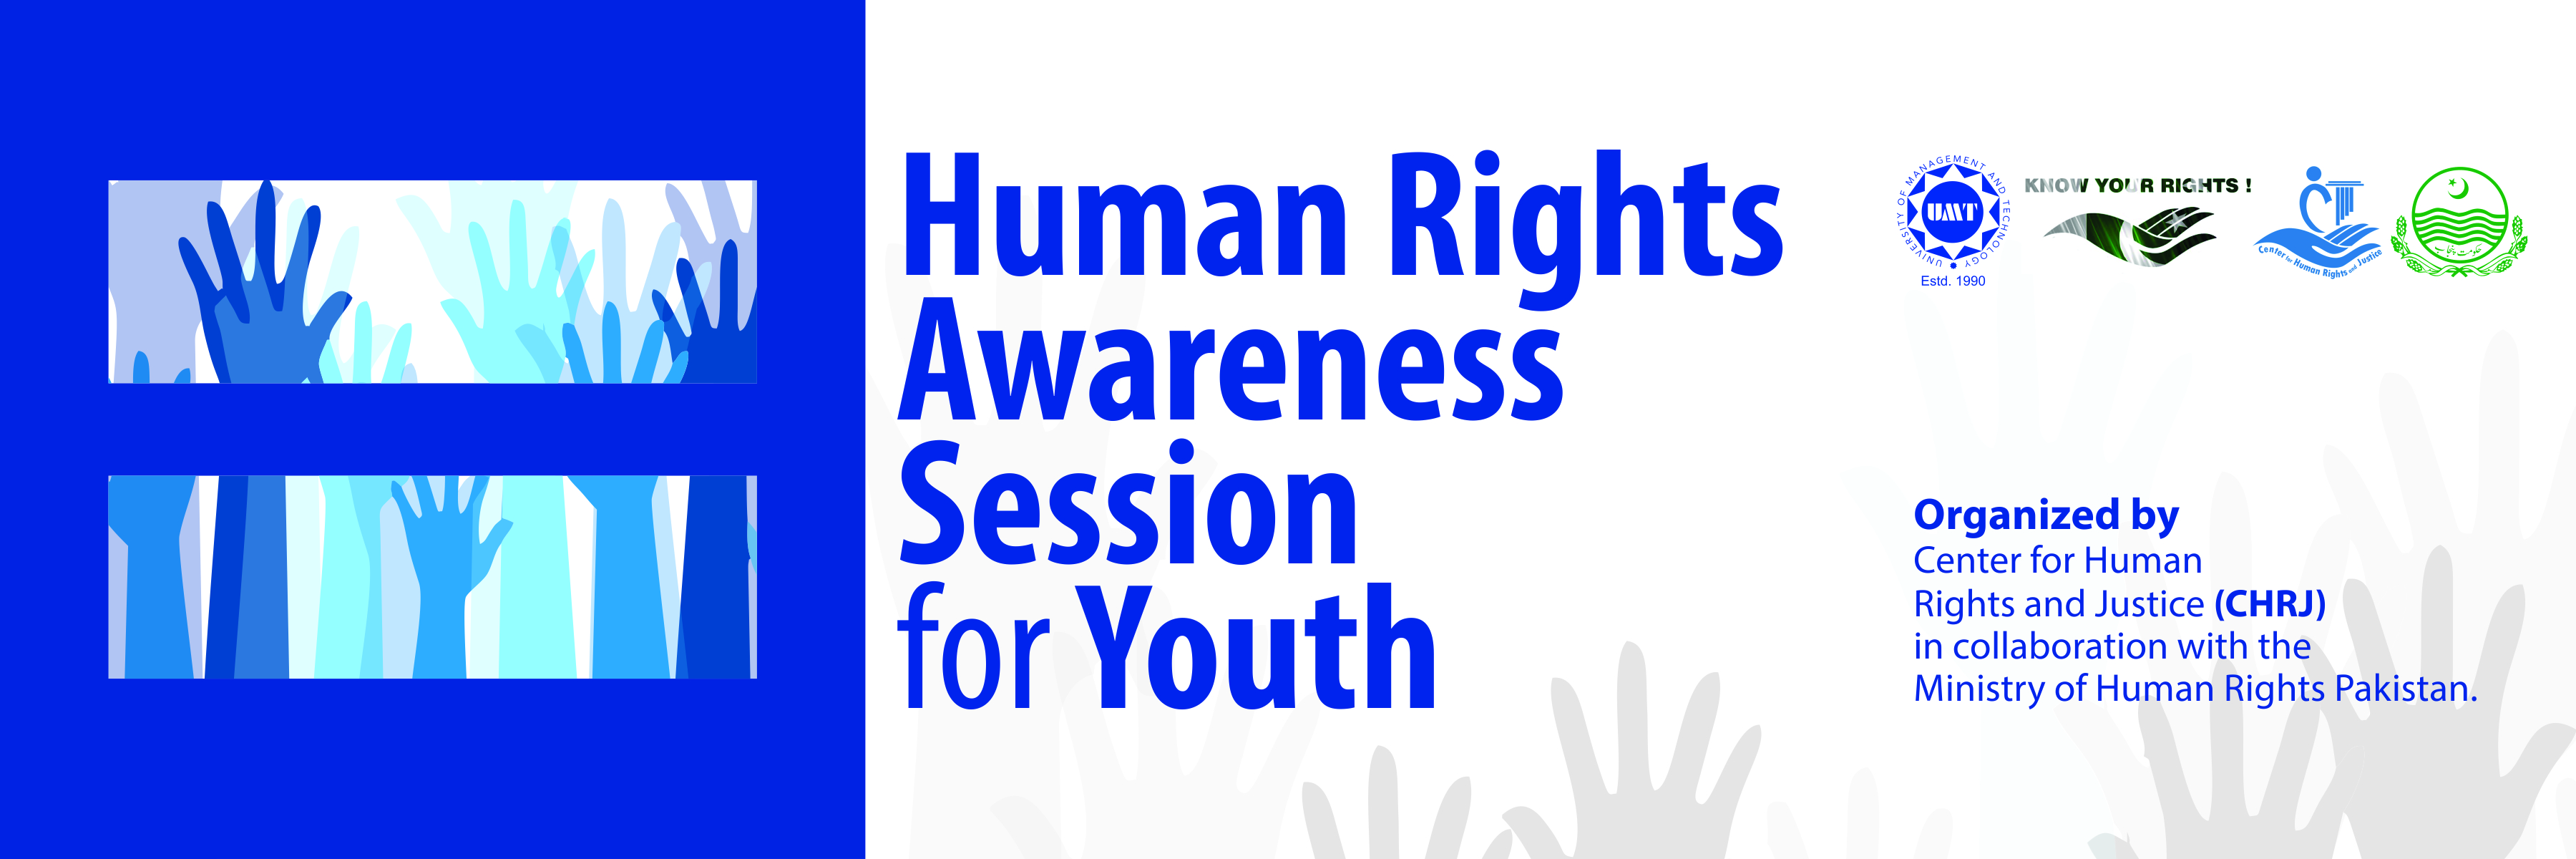 Human Rights Awareness Session for Youth